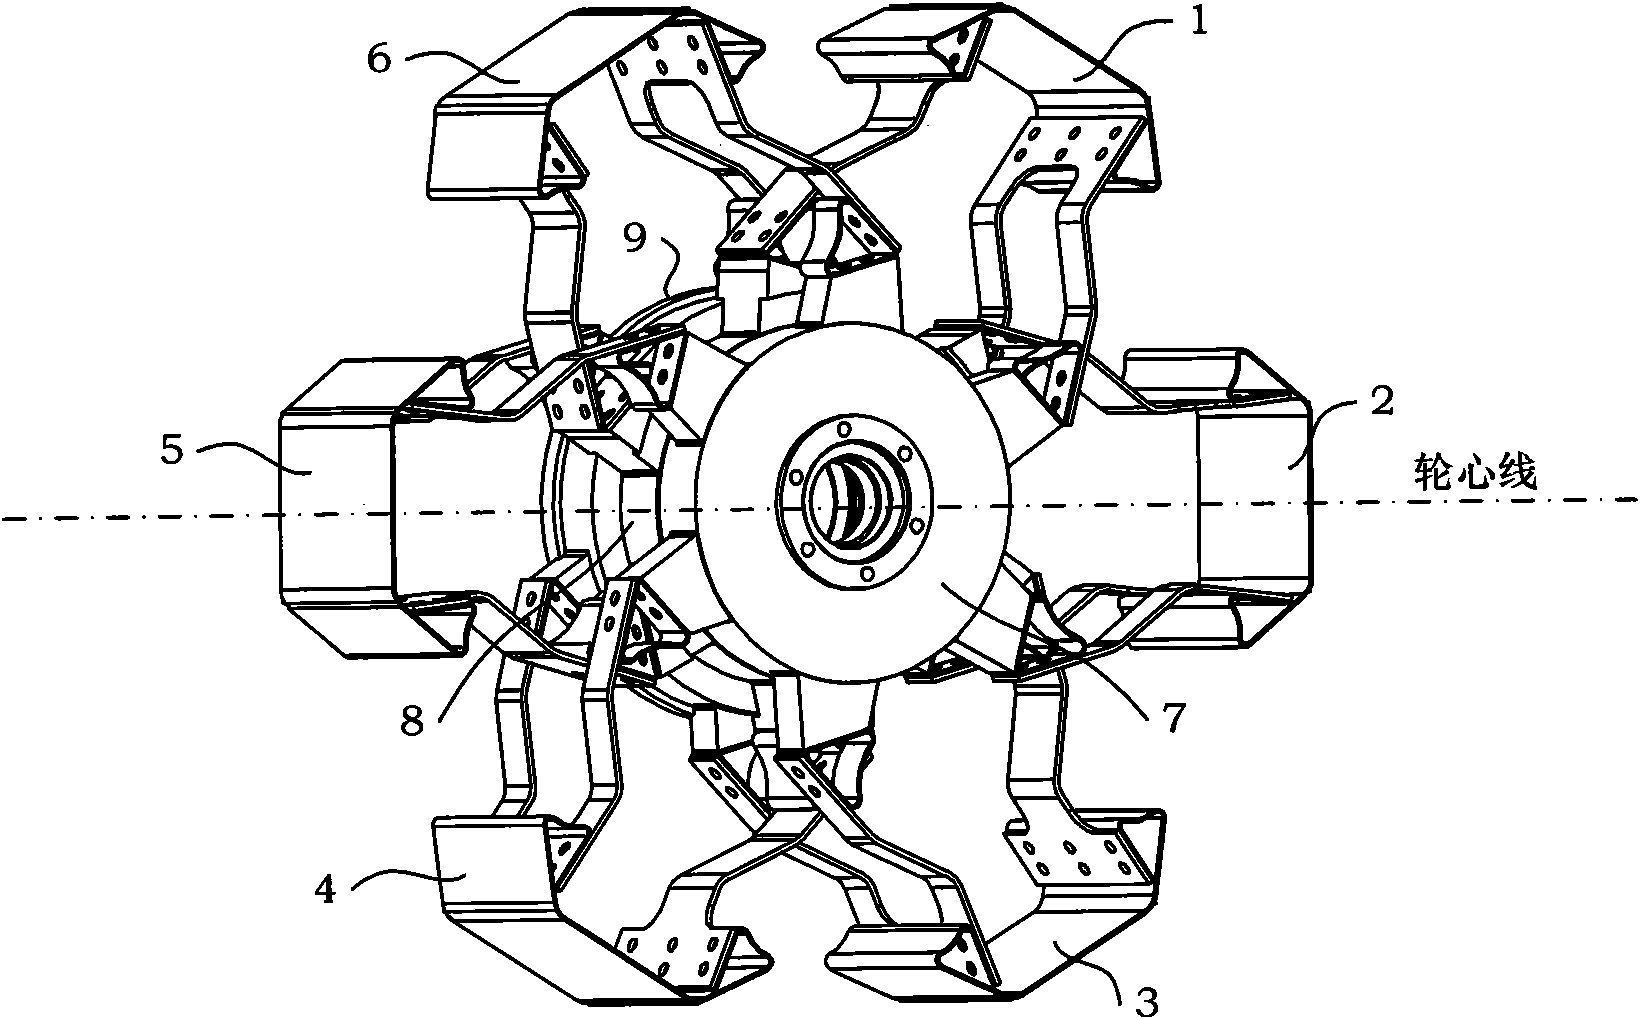 Multifunctional vehicle with variable diameter wheels and skids